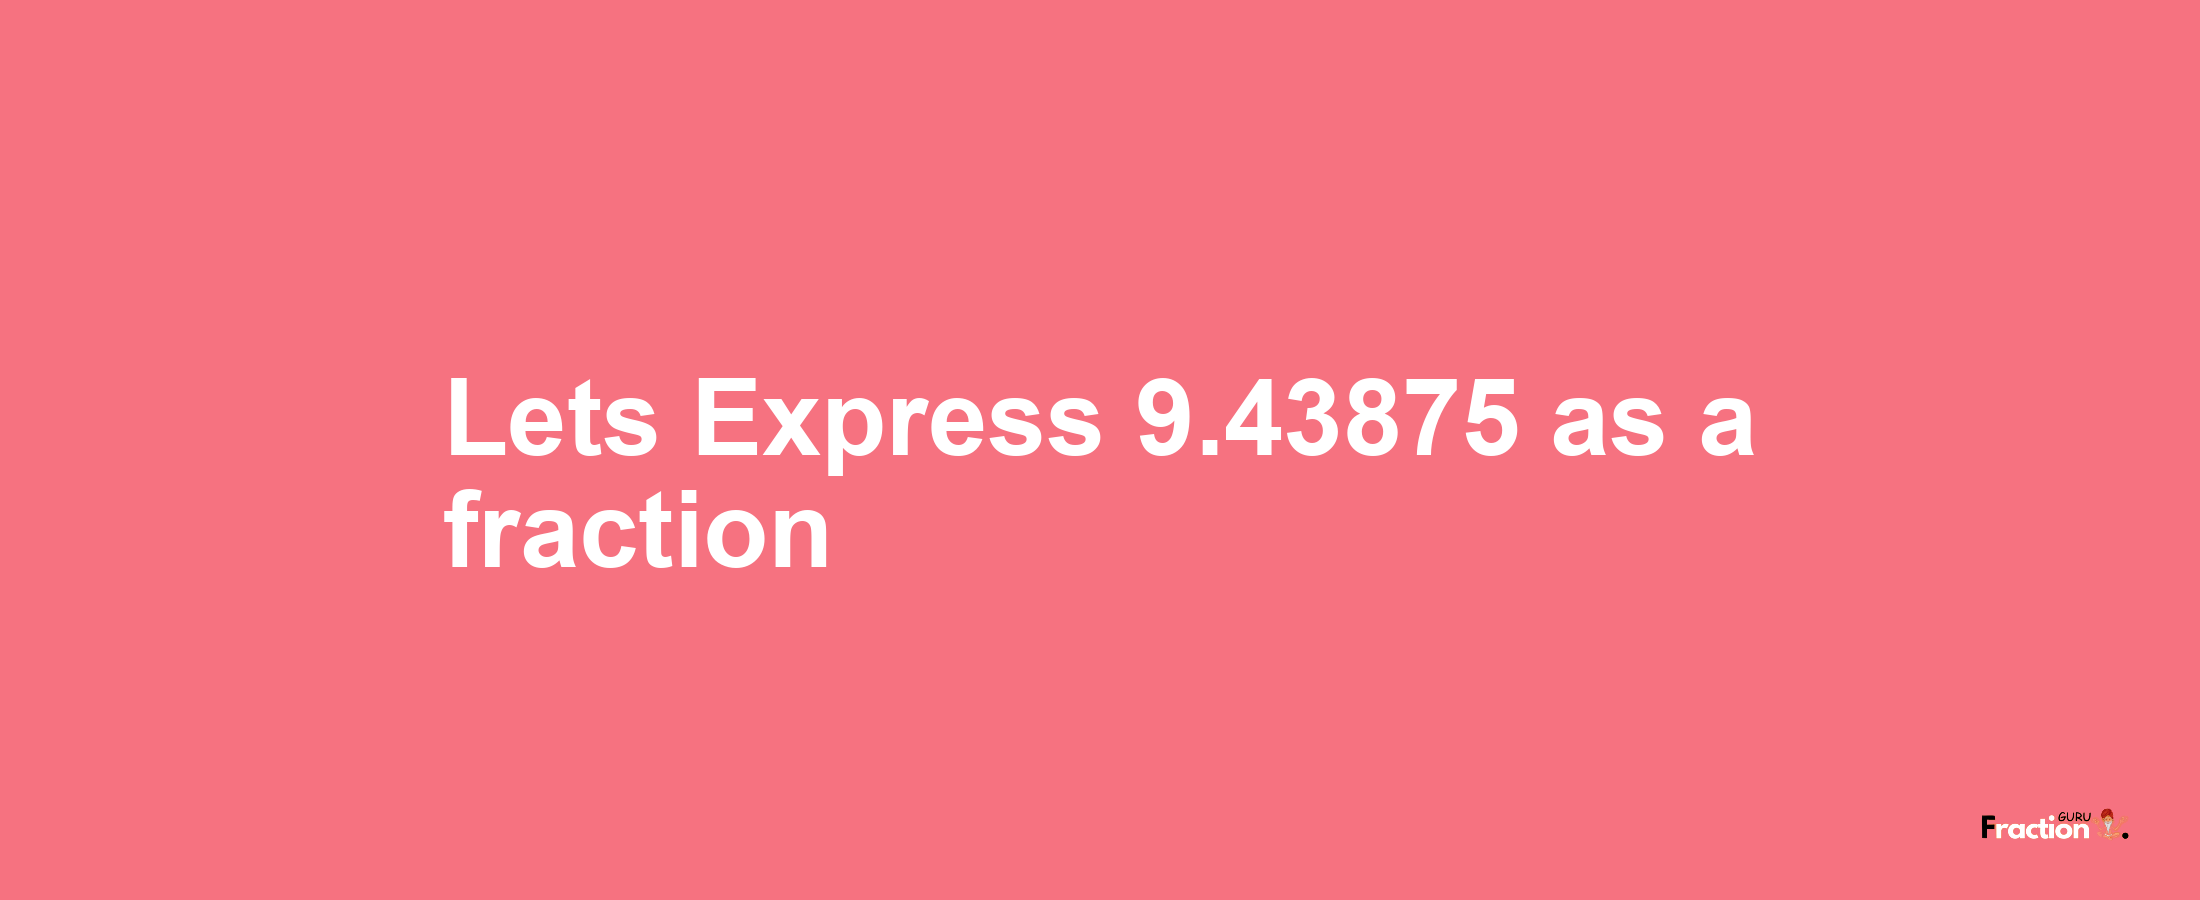 Lets Express 9.43875 as afraction